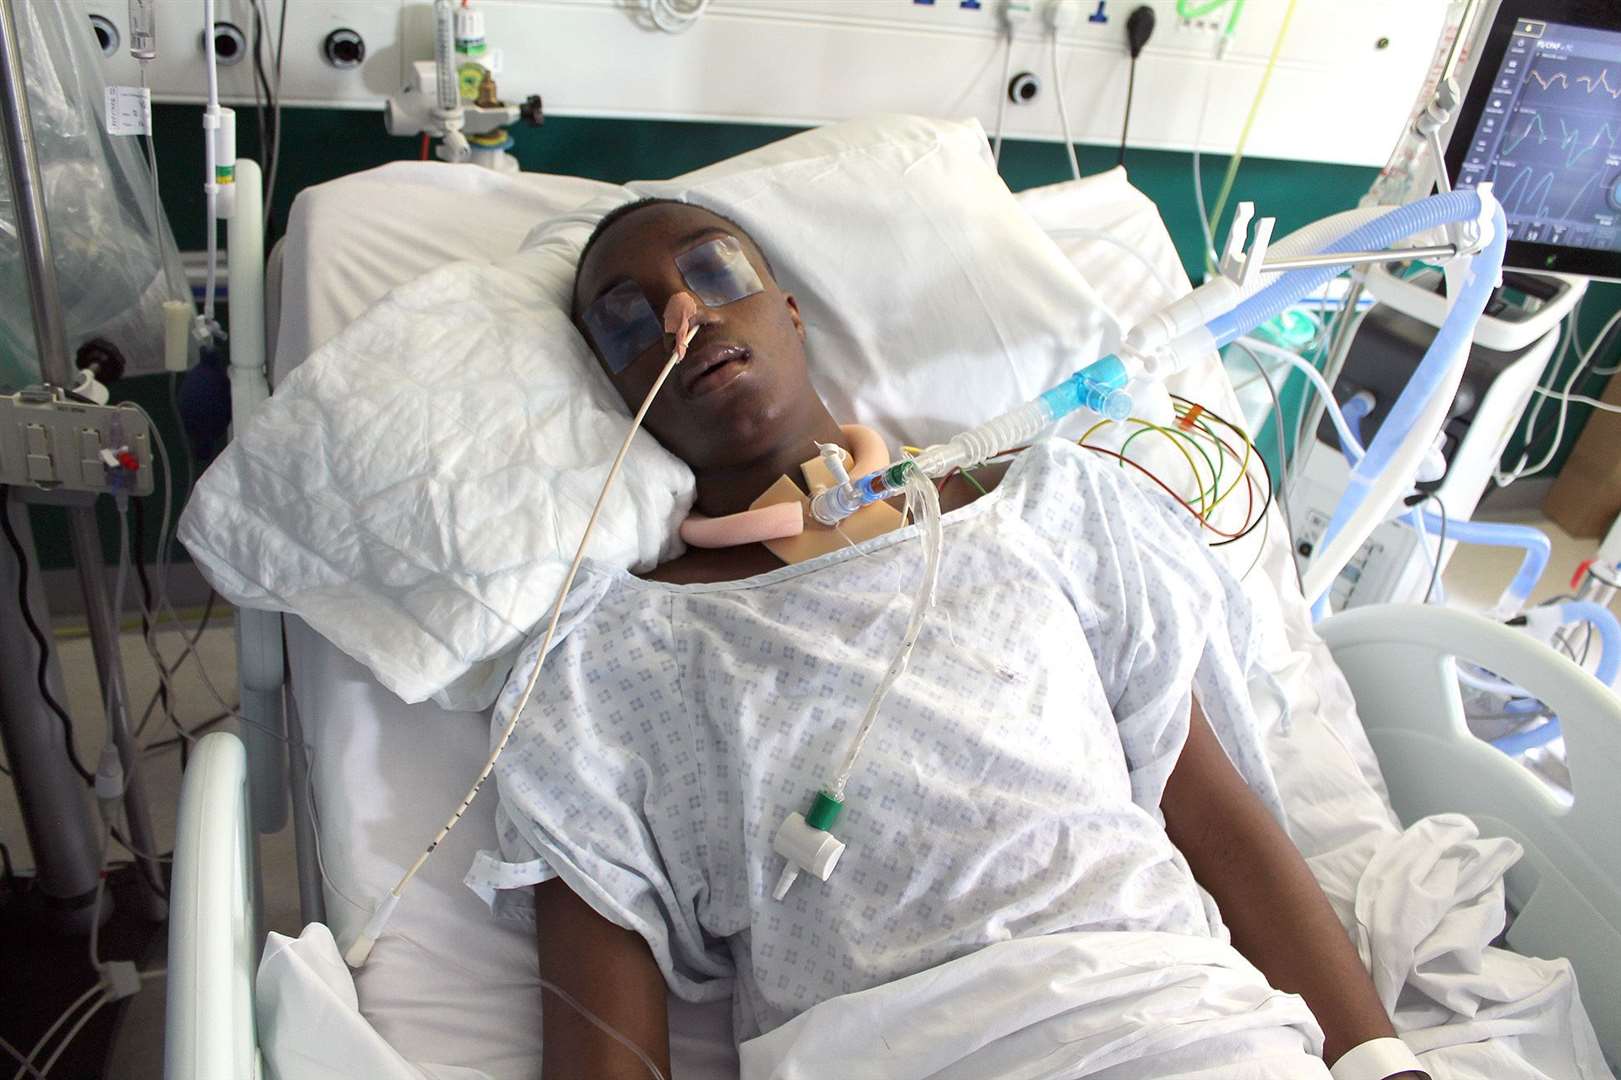 Jamel’s parents released a picture of him after the stabbing in a bid to bring his attackers to justice (Family handout/Metropolitan Police/PA)